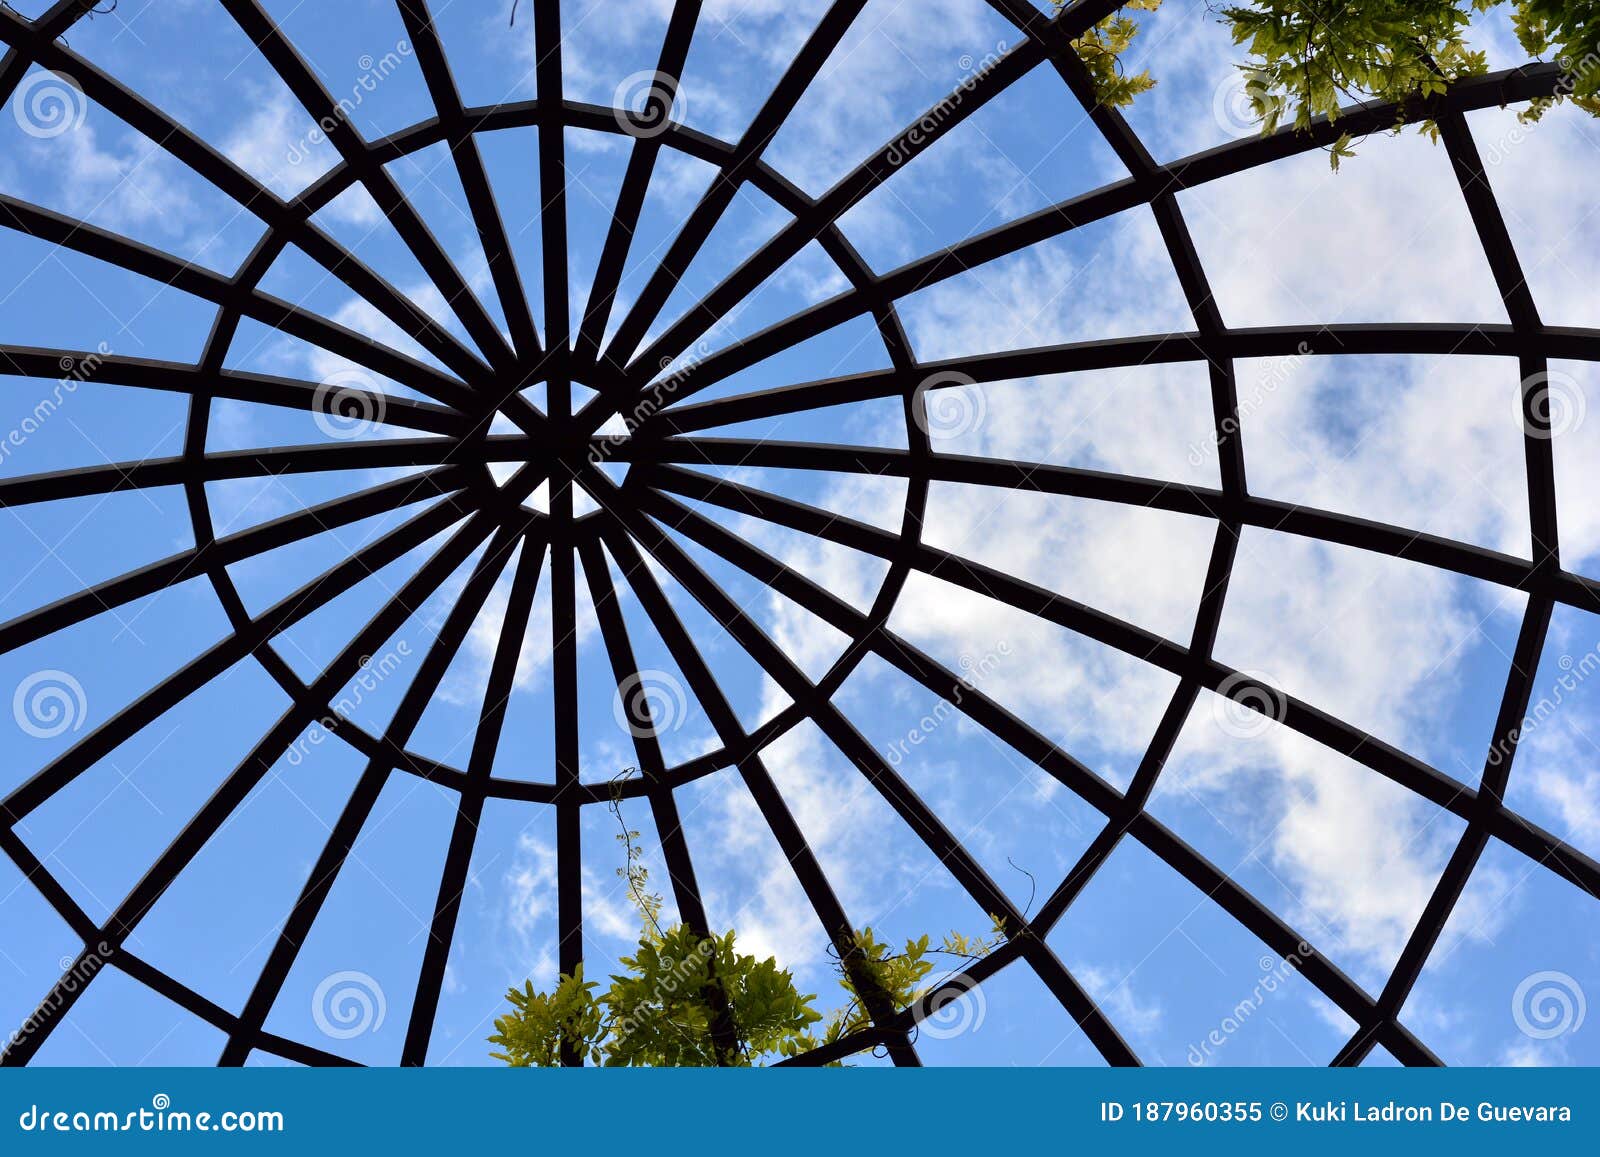 structure of a steel dome